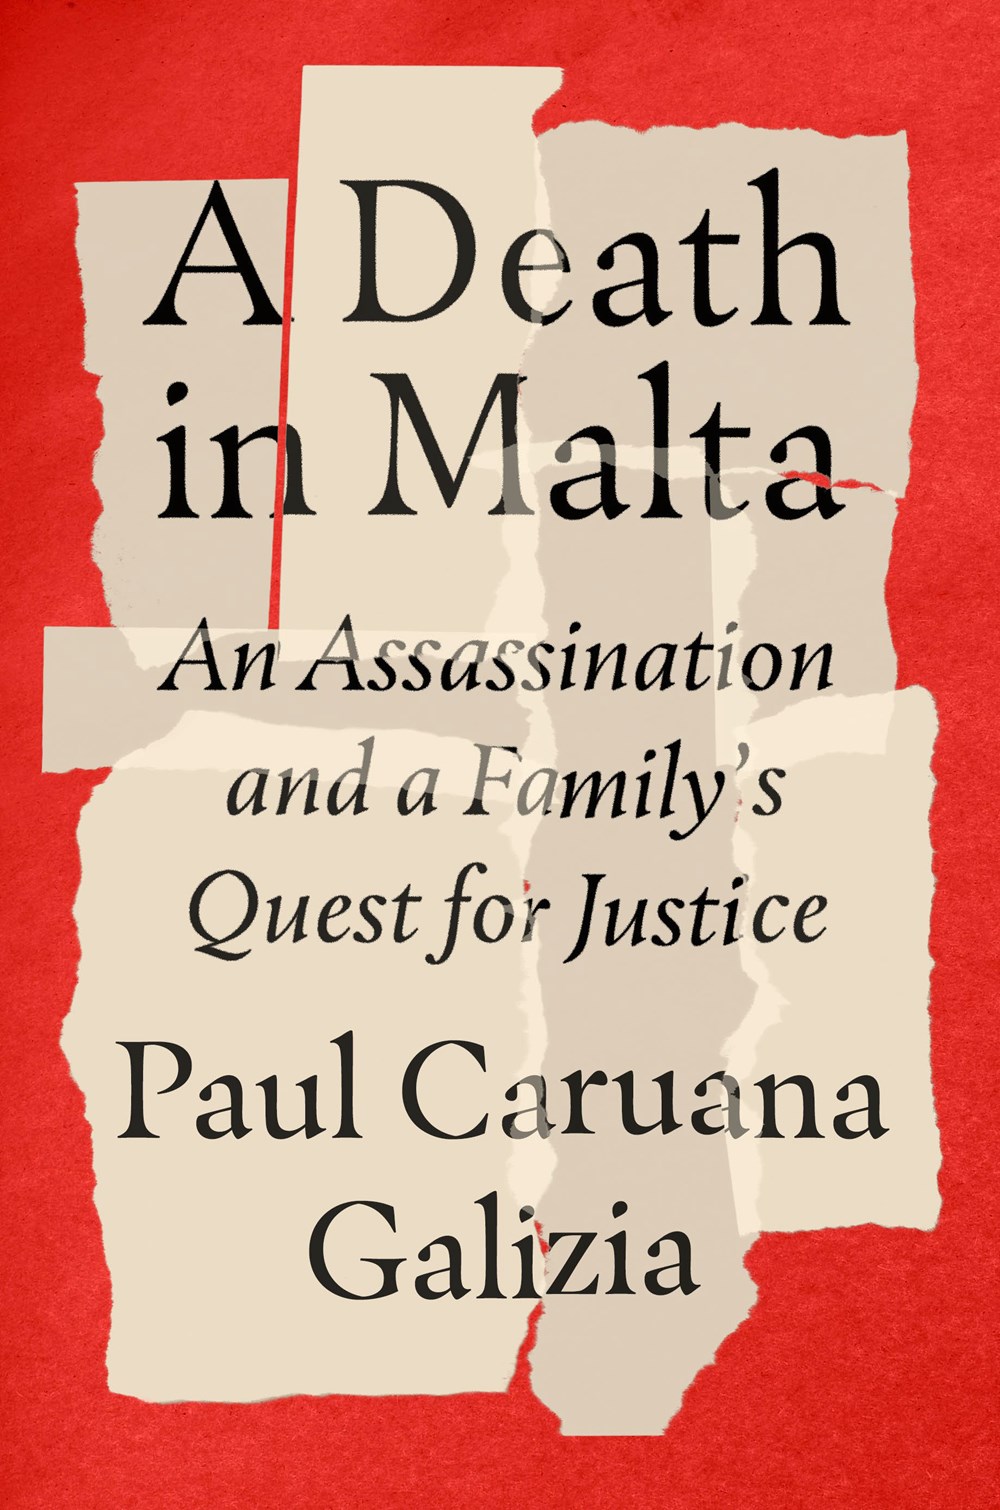 A Death in Malta: An Assassination and a Family’s Quest for Justice